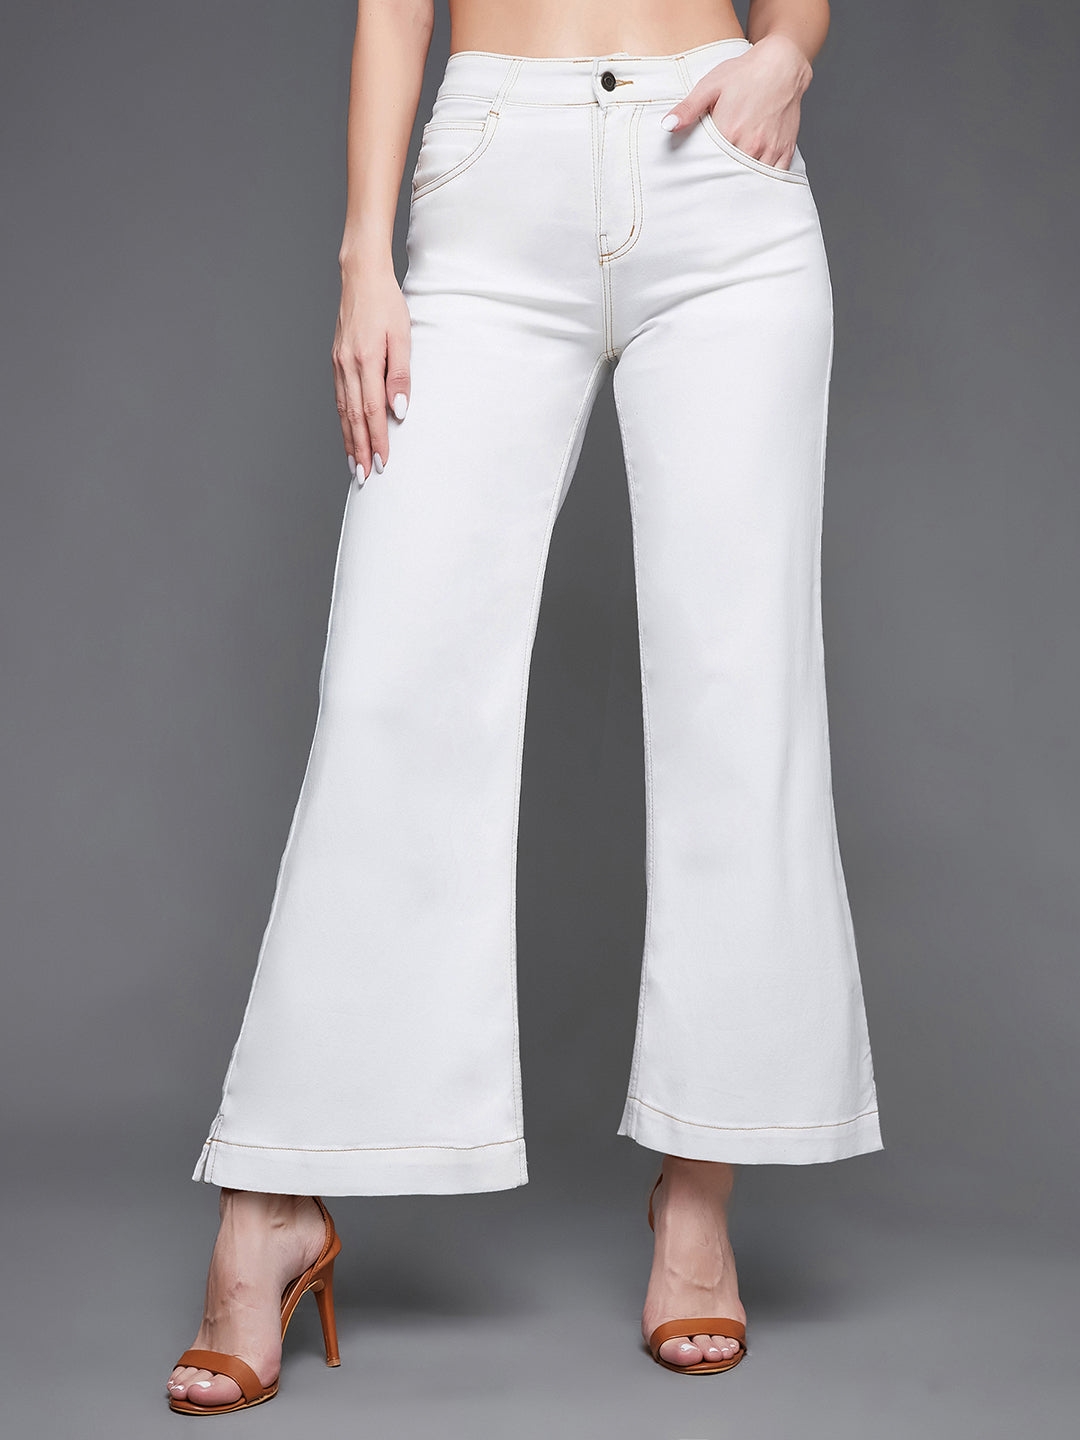 MISS CHASE | White Flared Mid Rise Clean Look Ankle length Stretchable Denim Jeans